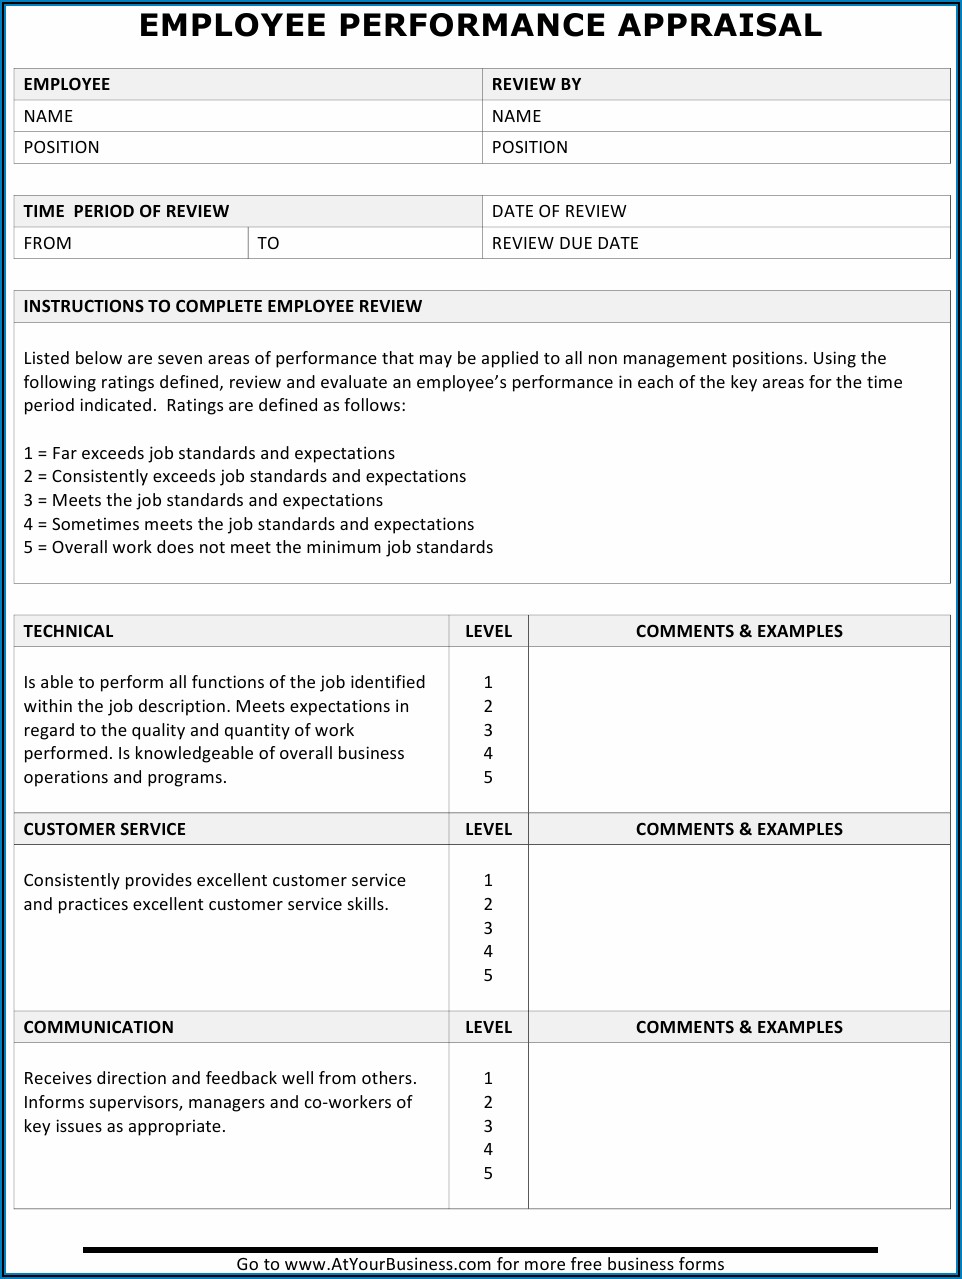 Employee Performance Appraisal Form Example - Form : Resume Examples # ...